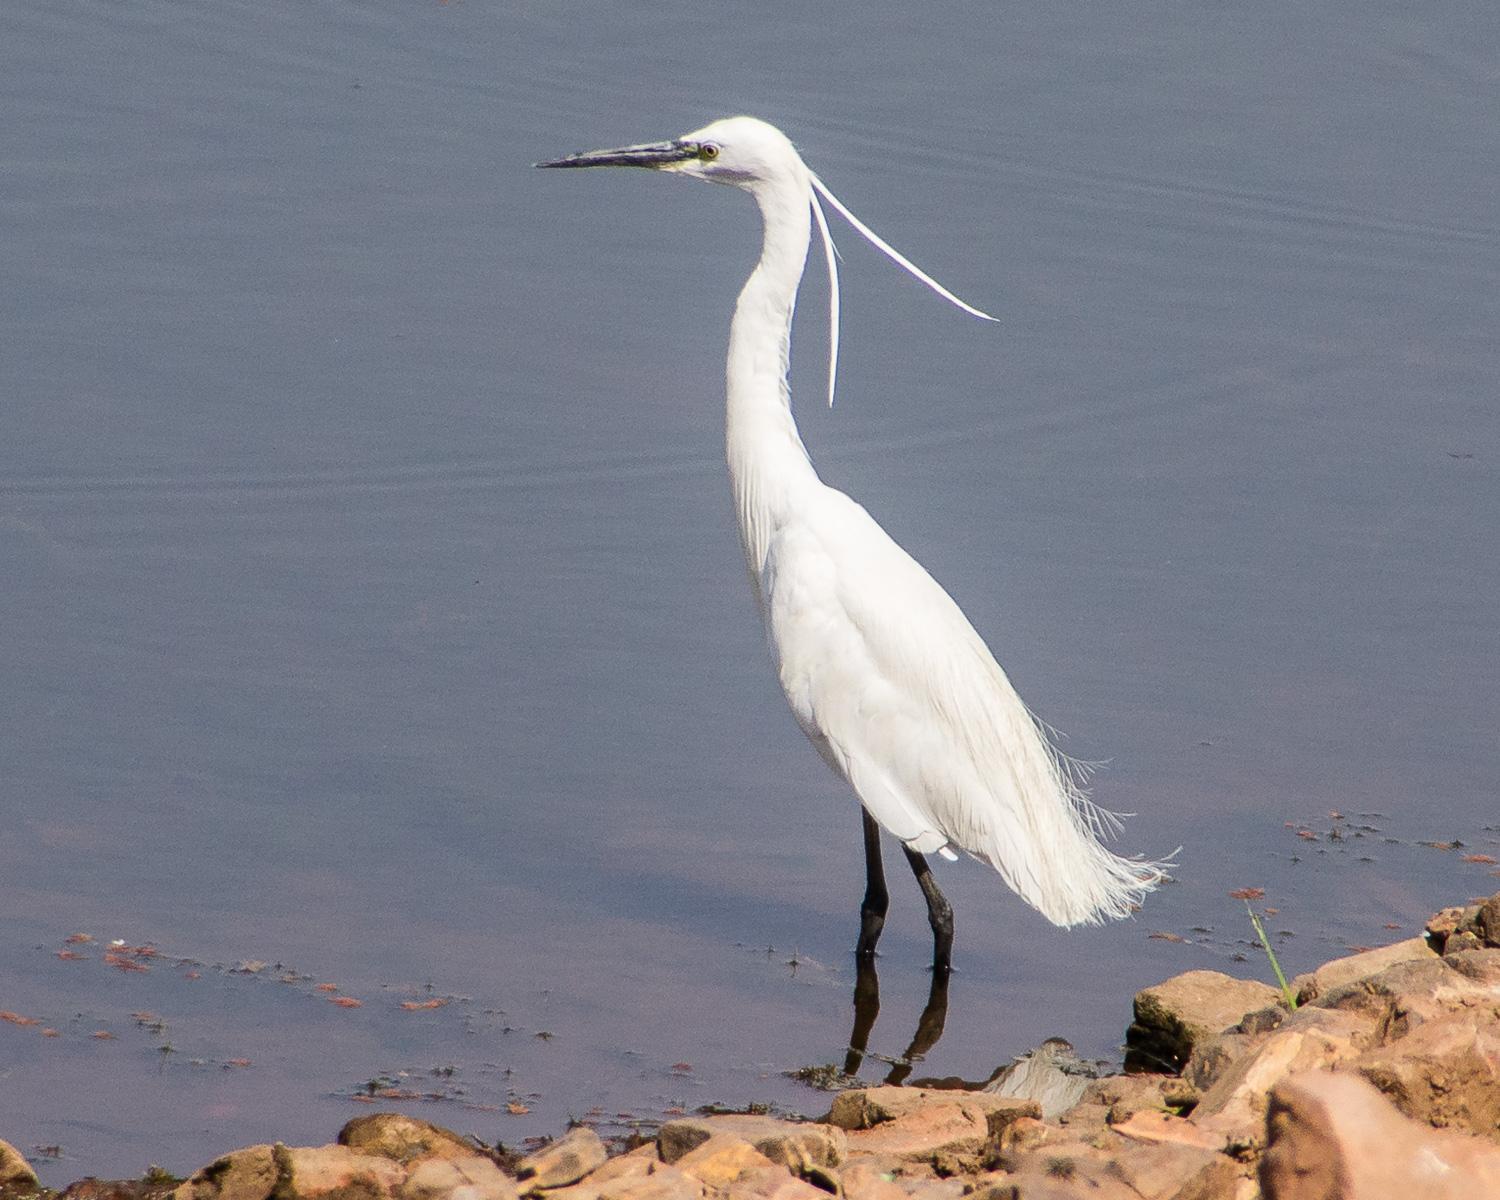 Little Egret Photo by Lisa Orchard